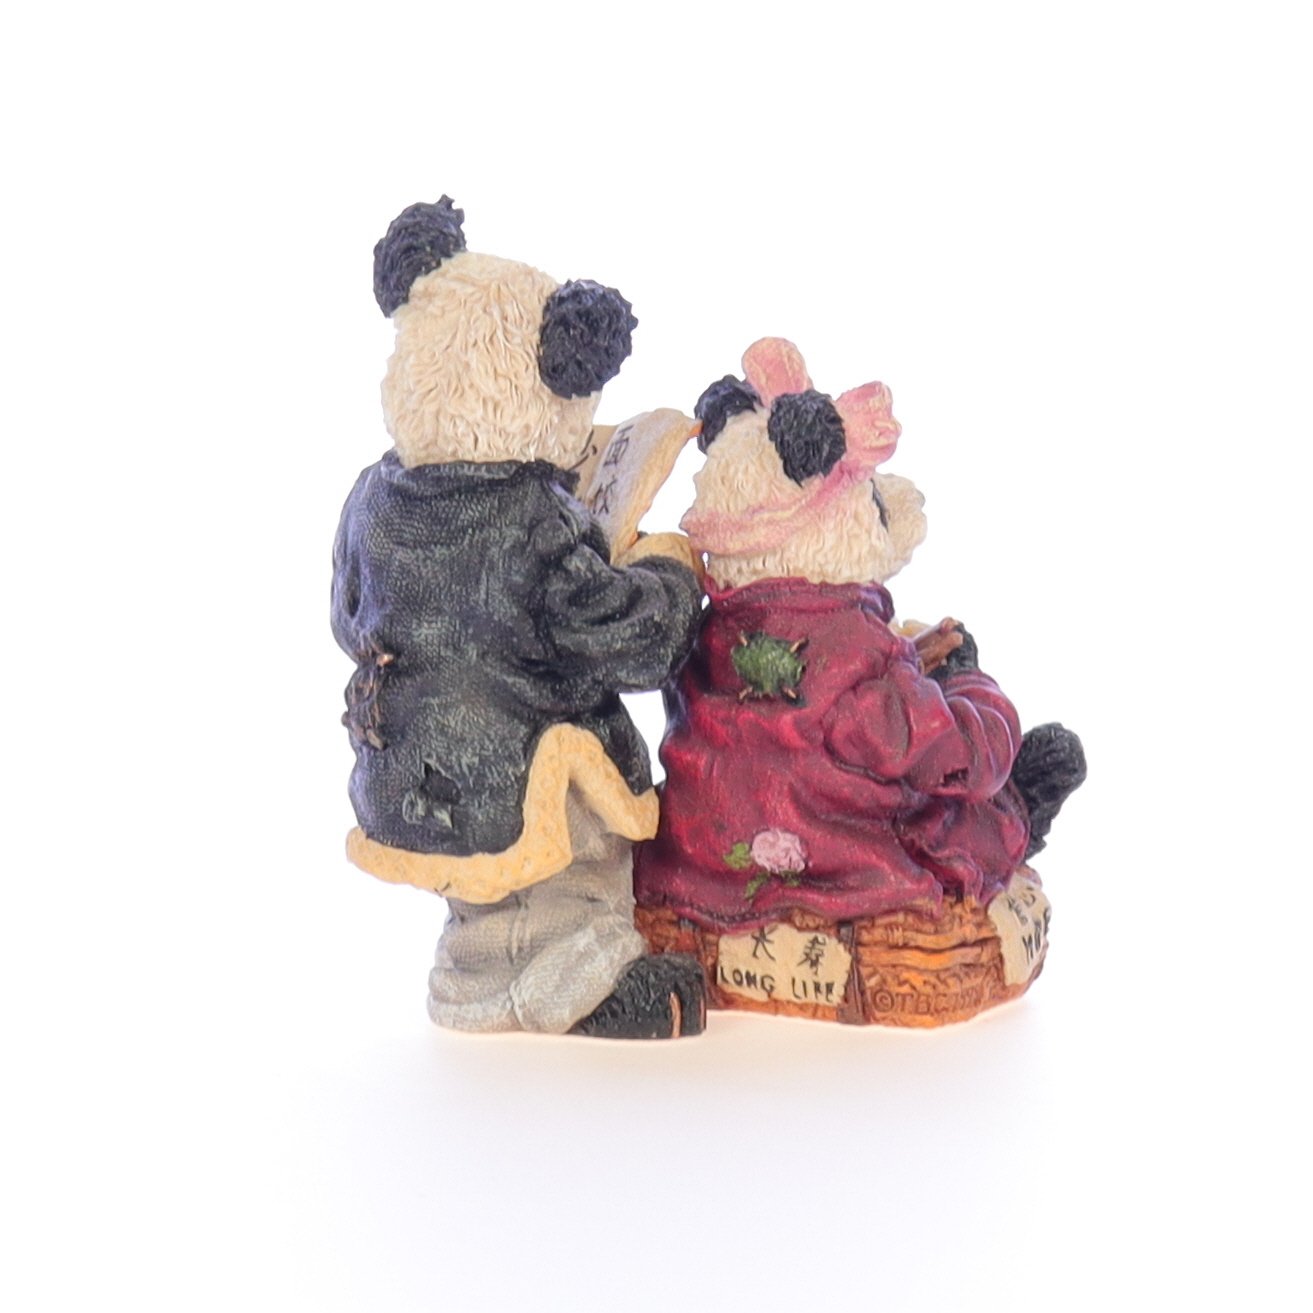 Boyds_Bears_Bearstone_Resin_Figurine_Hsing_Hsing_and_Ling_Ling_Wongbruin_Carryout_2433_06